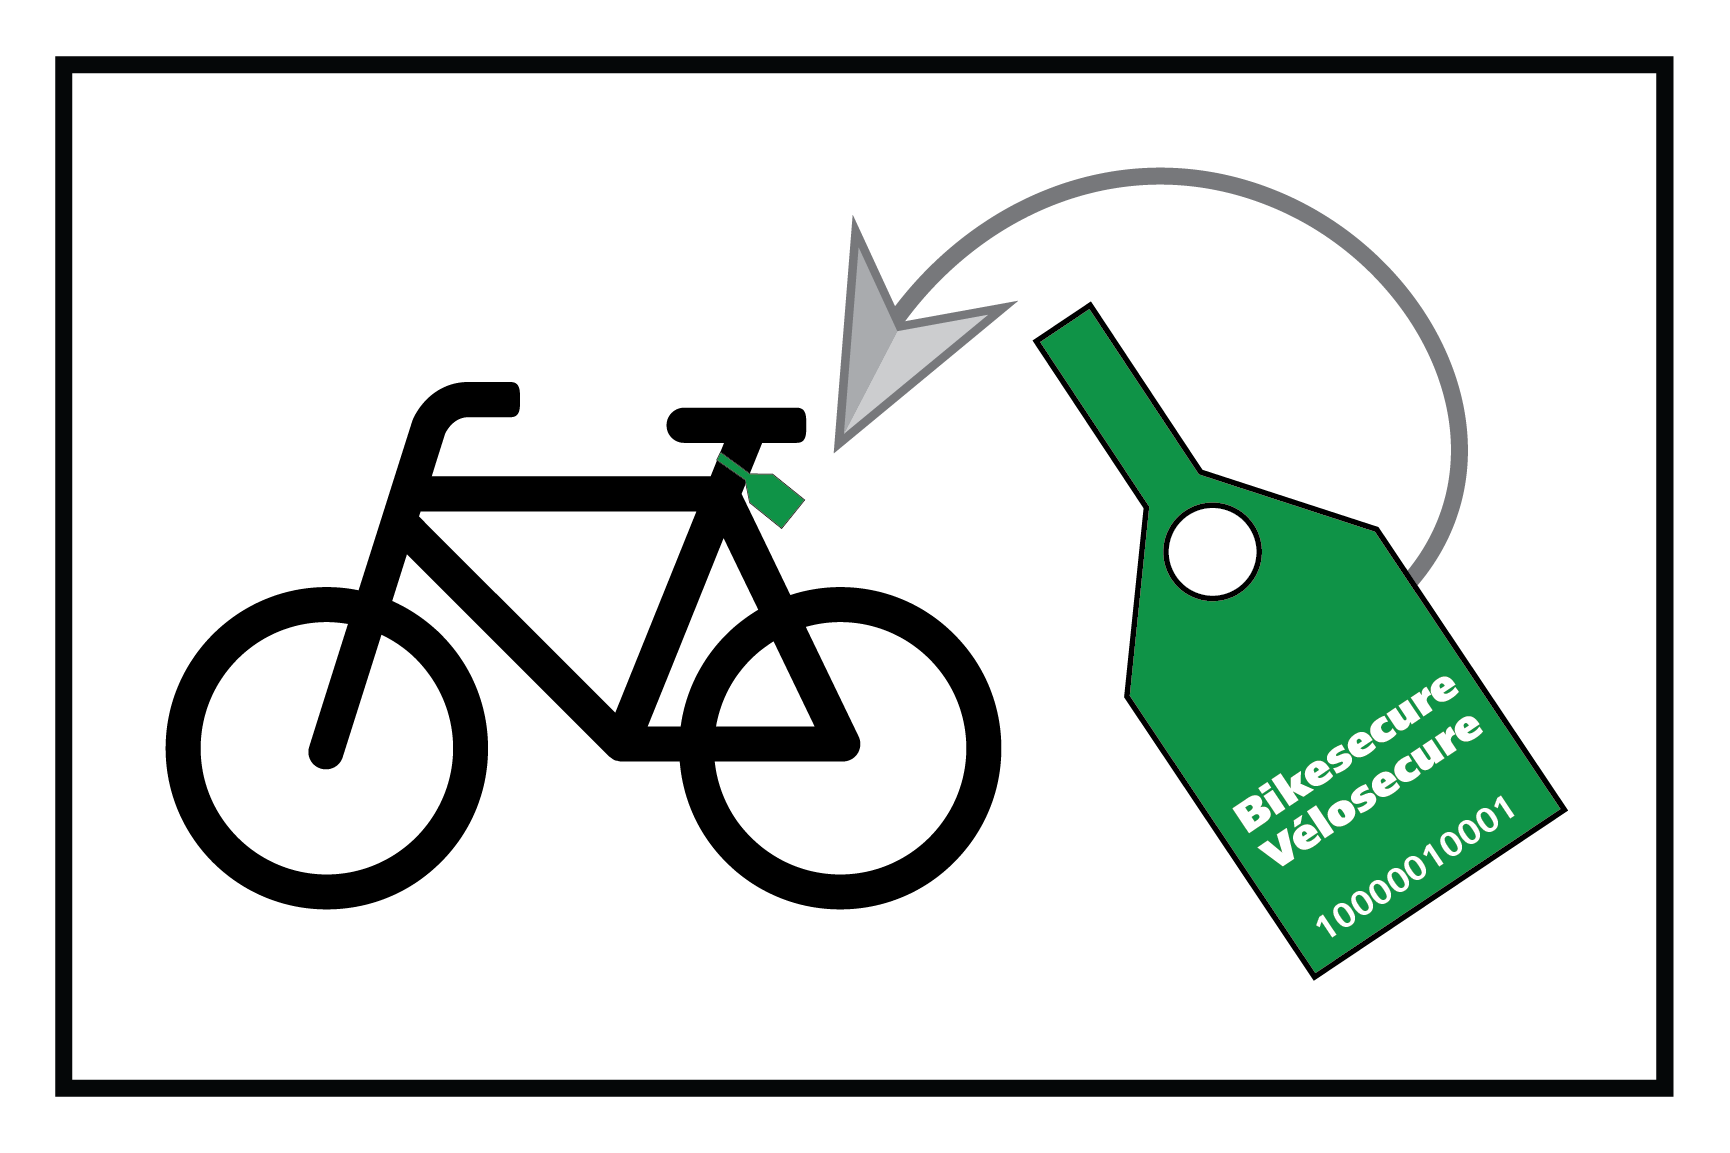 A diagram showing where to place Bikesecure tags onto a bike.